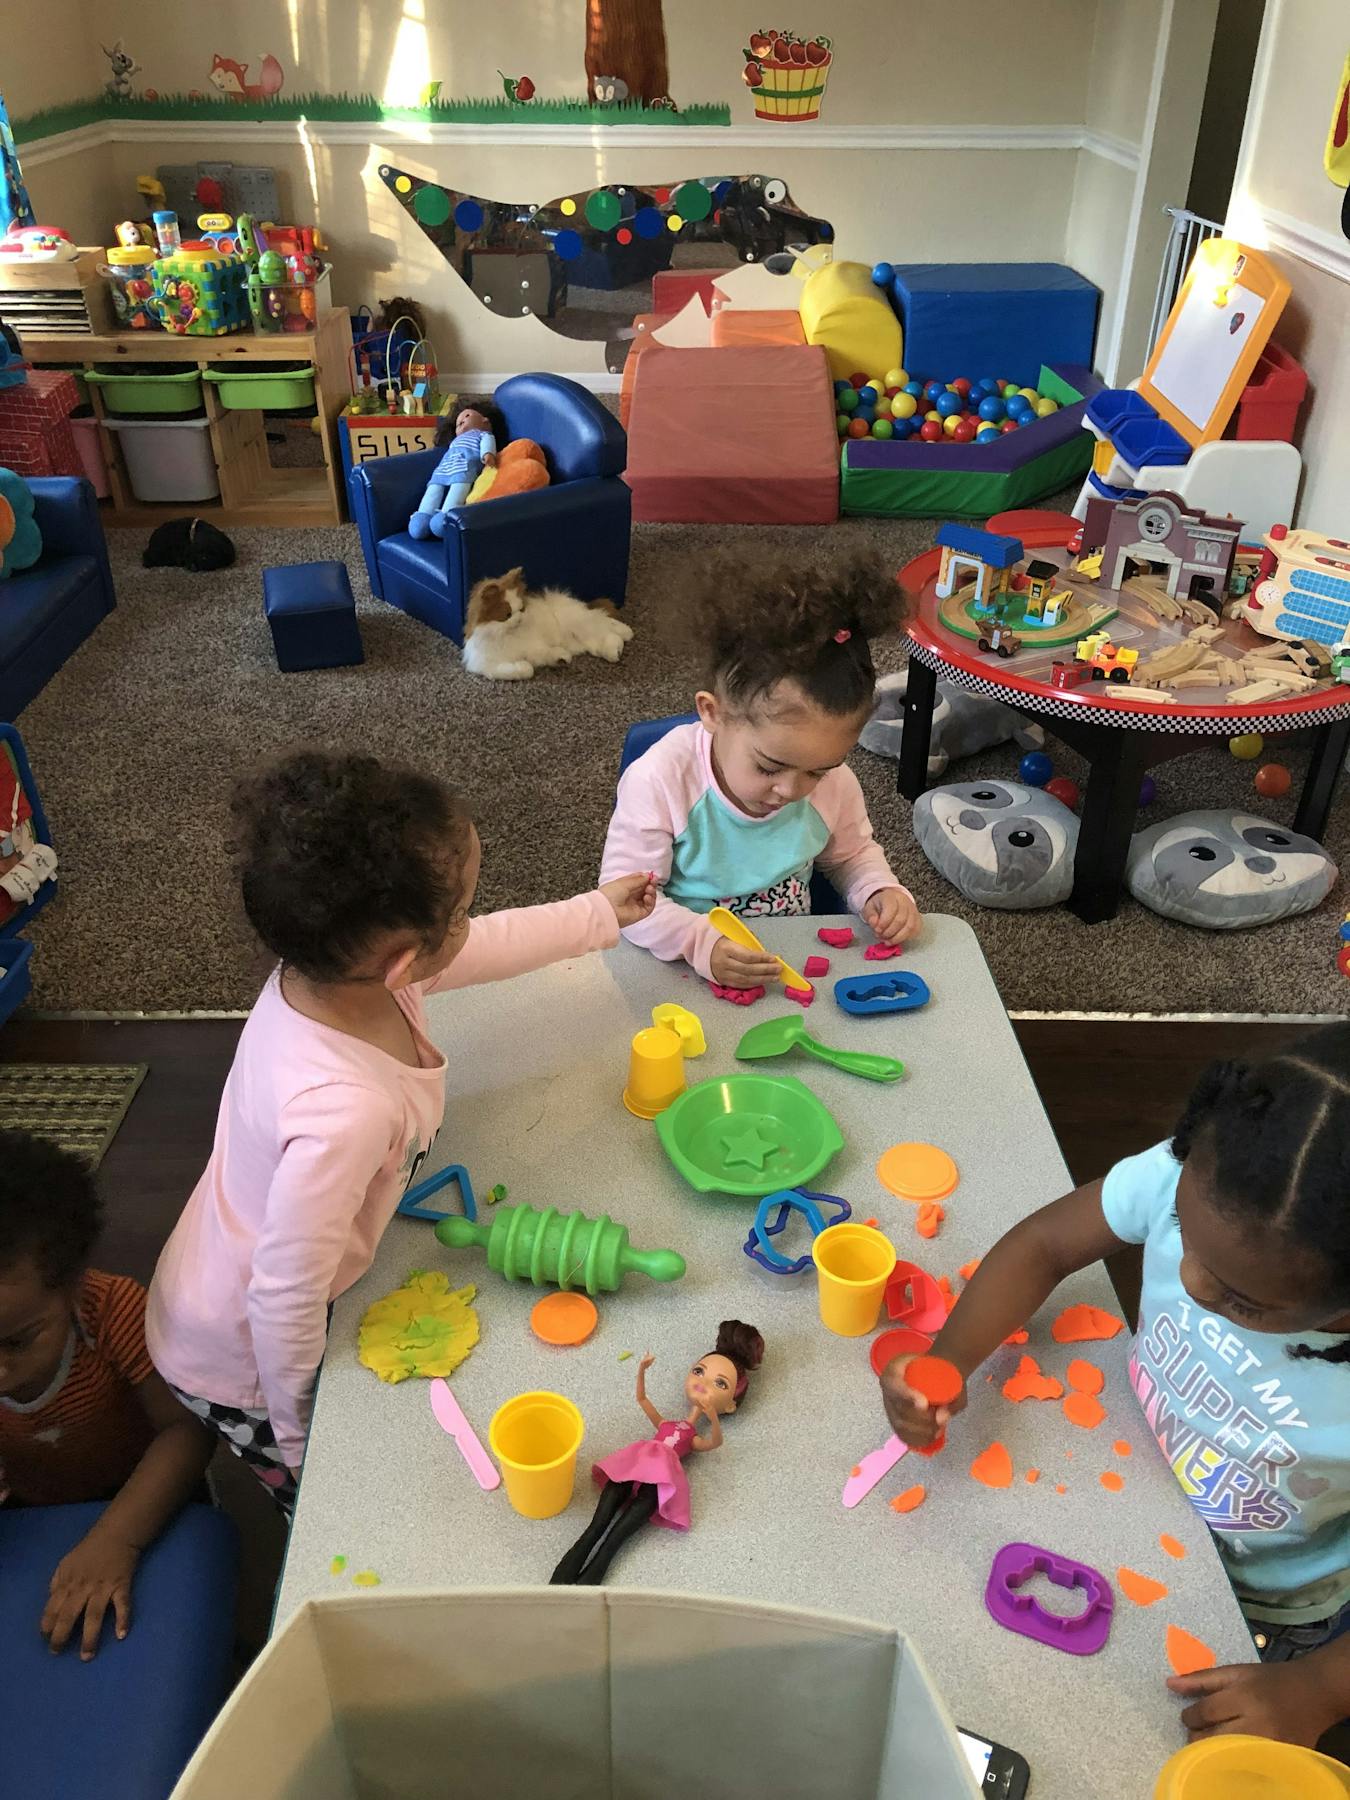 Drop in child care near me information